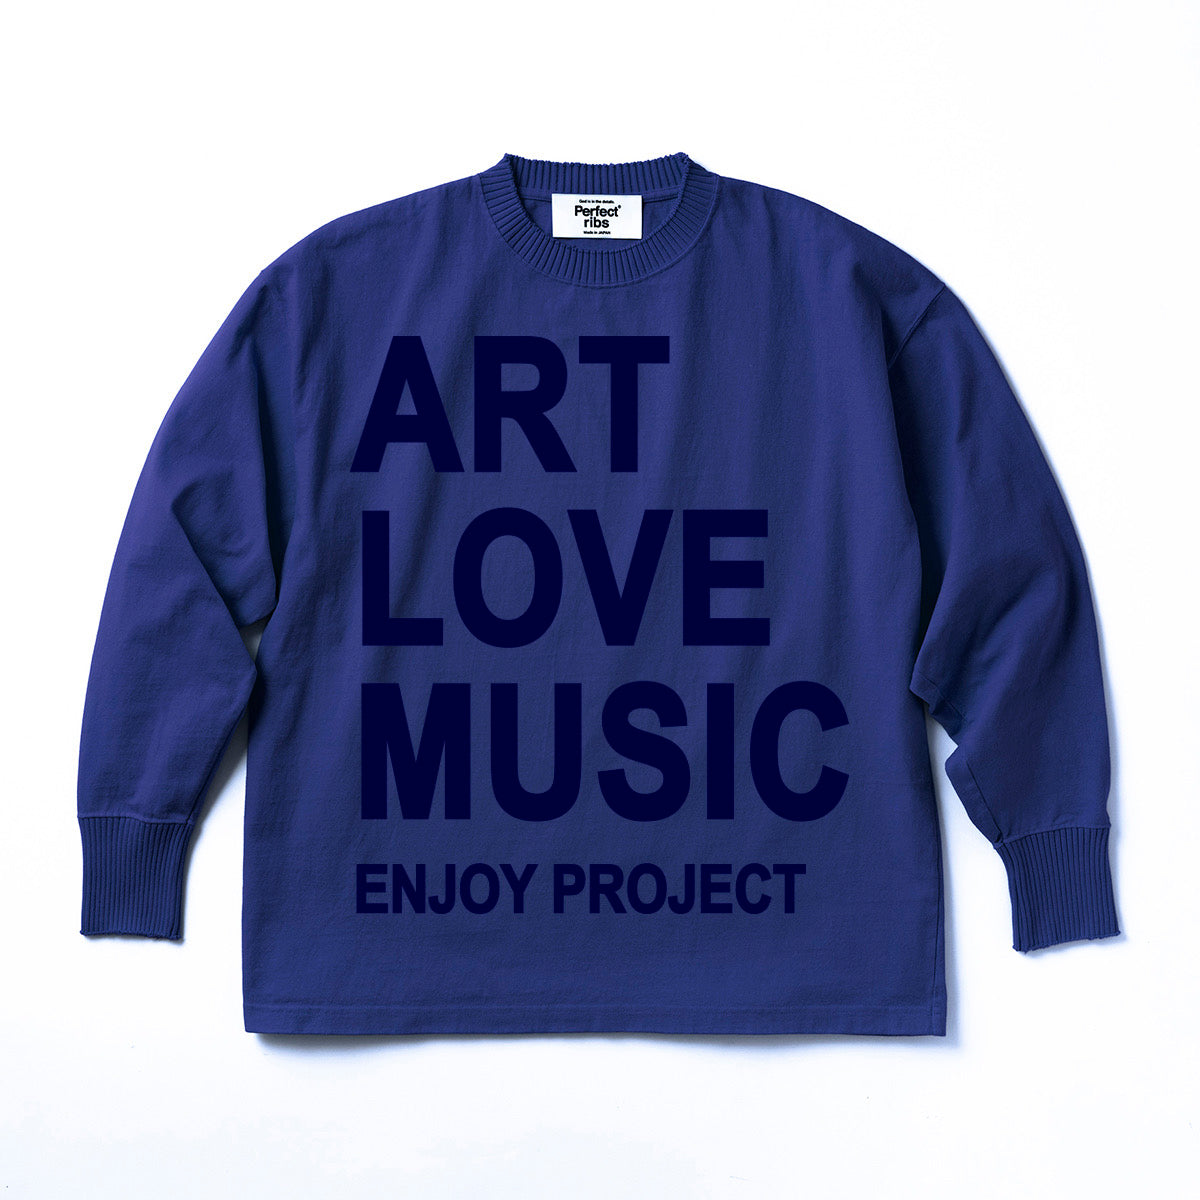 Exclusive Color【Perfect ribs®︎×A LOVE MOVEMENT】 "ART LOVE MUSIC" Basic Long Sleeve T Shirt / Vintage Navy×Ink Blue